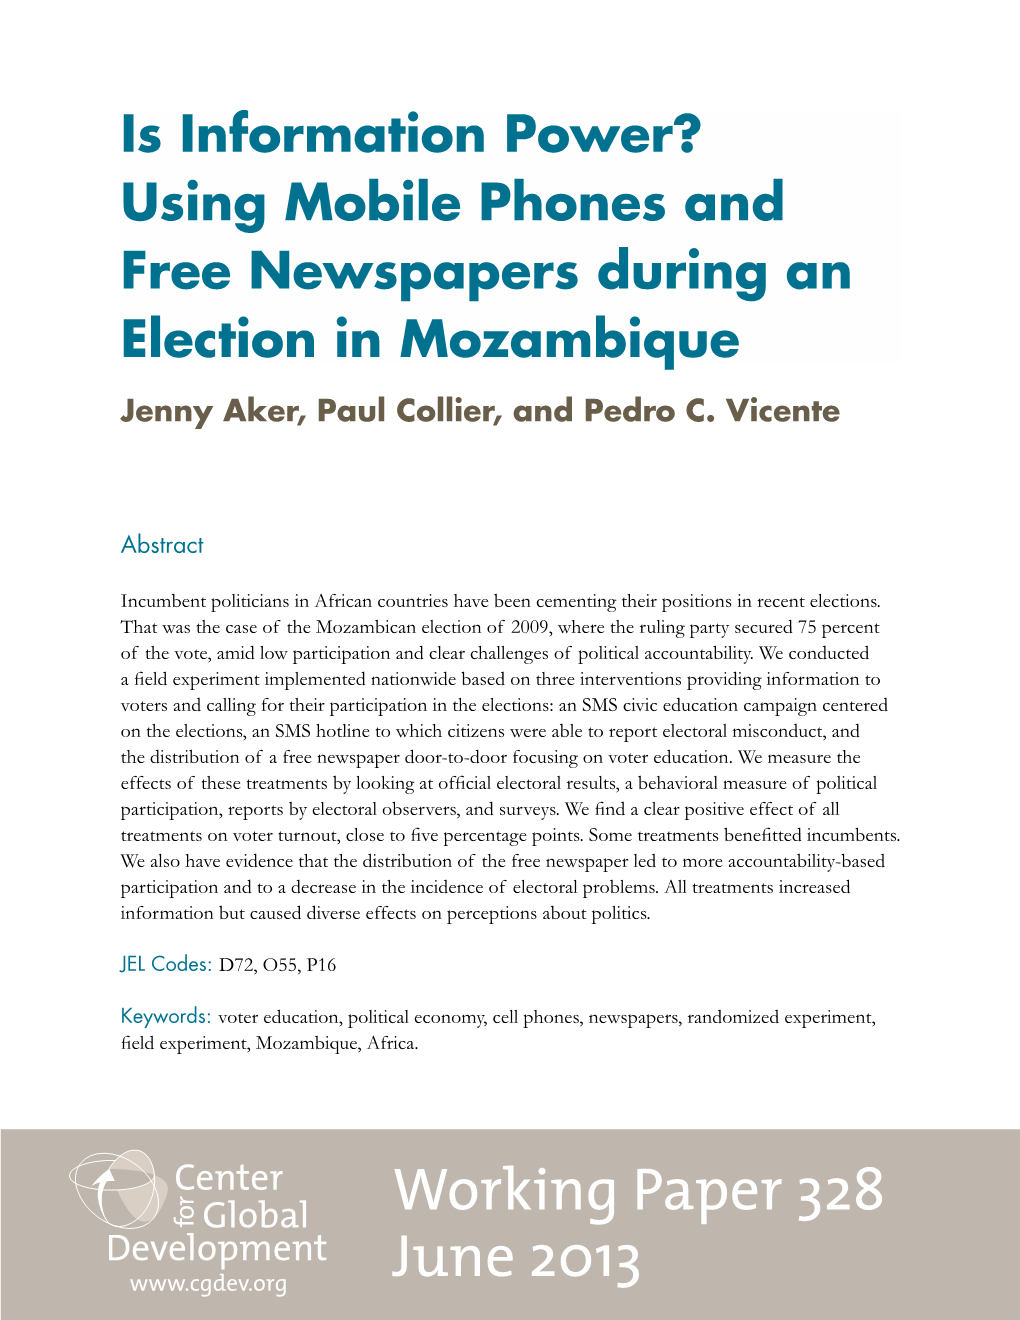 Is Information Power? Using Mobile Phones and Free Newspapers During an Election in Mozambique Jenny Aker, Paul Collier, and Pedro C